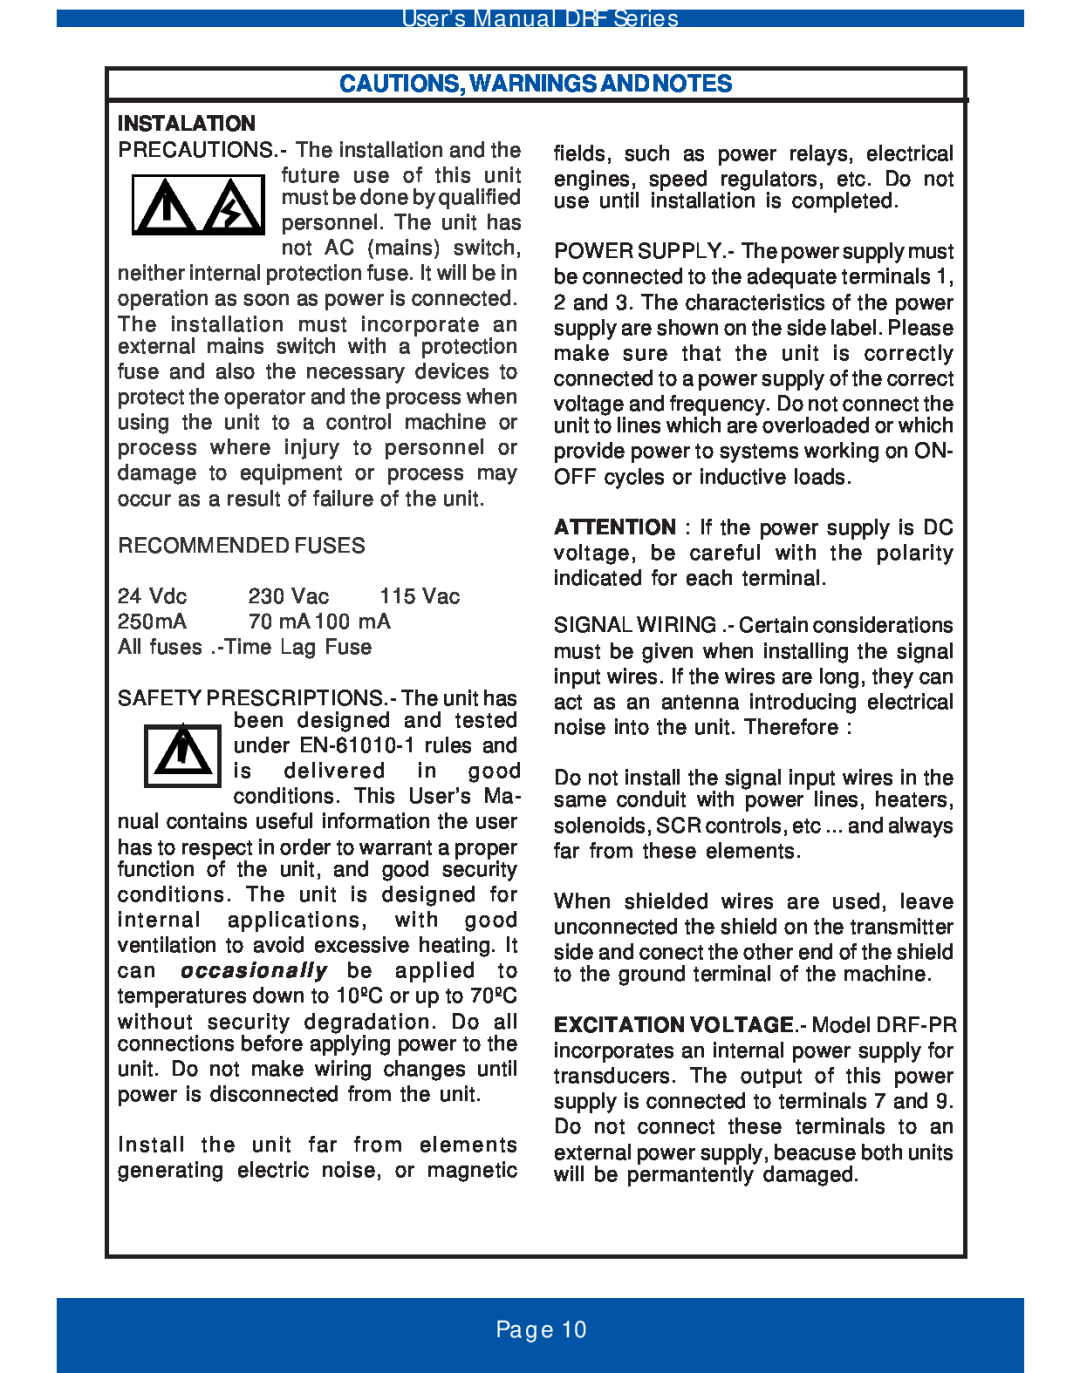 Omega Vehicle Security DRF-POT, DRF-RES Series manual Cautions, Warnings And Notes, Instalation, Page 